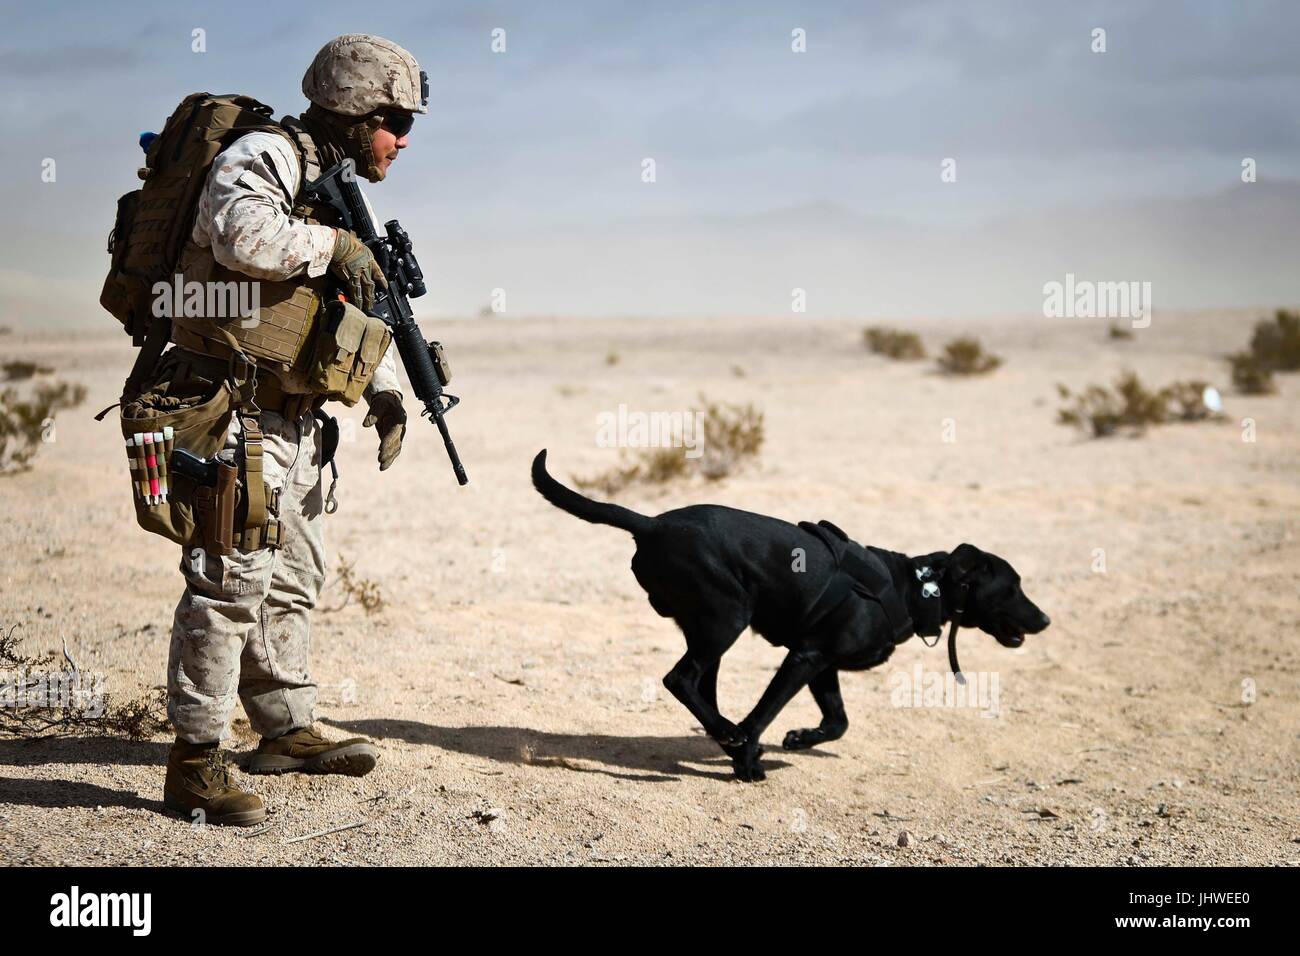 A U.S. Marine Corps soldier and his military working dog, Red, search for improvised explosive devices during an Integrated Training Exercise at the Marine Corps Air Ground Combat Center January 19, 2017 in Twentynine Palms, California.    (photo by Aaron S. Patterson via Planetpix) Stock Photo